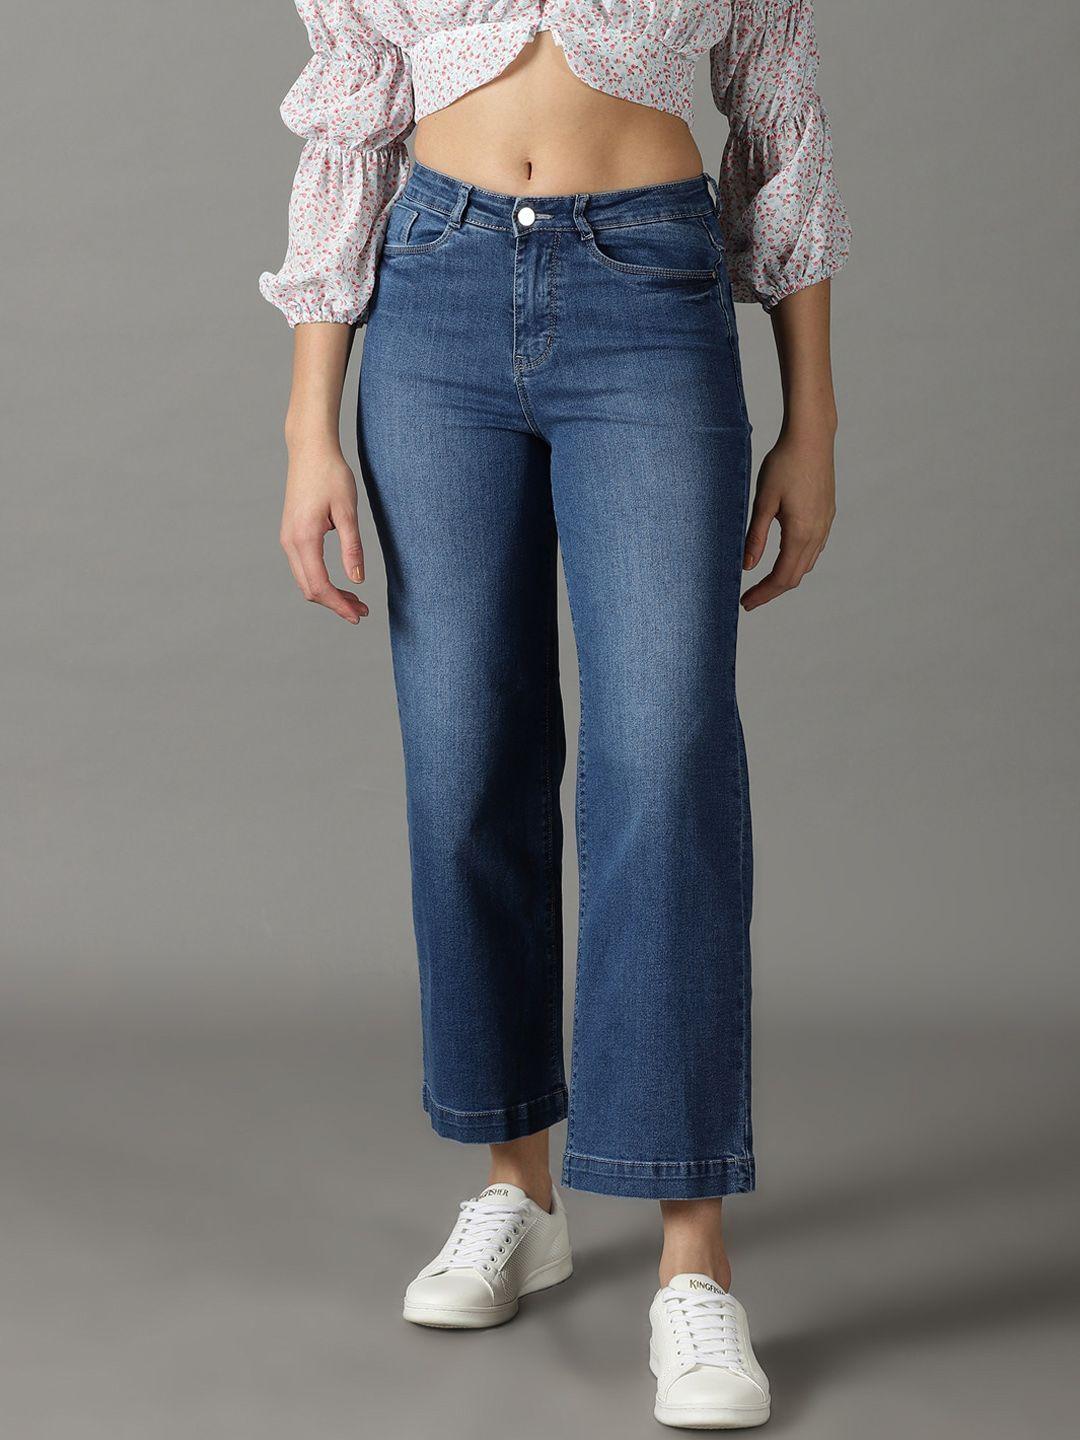 showoff-women-wide-leg-high-rise-light-fade-stretchable-cotton-jeans